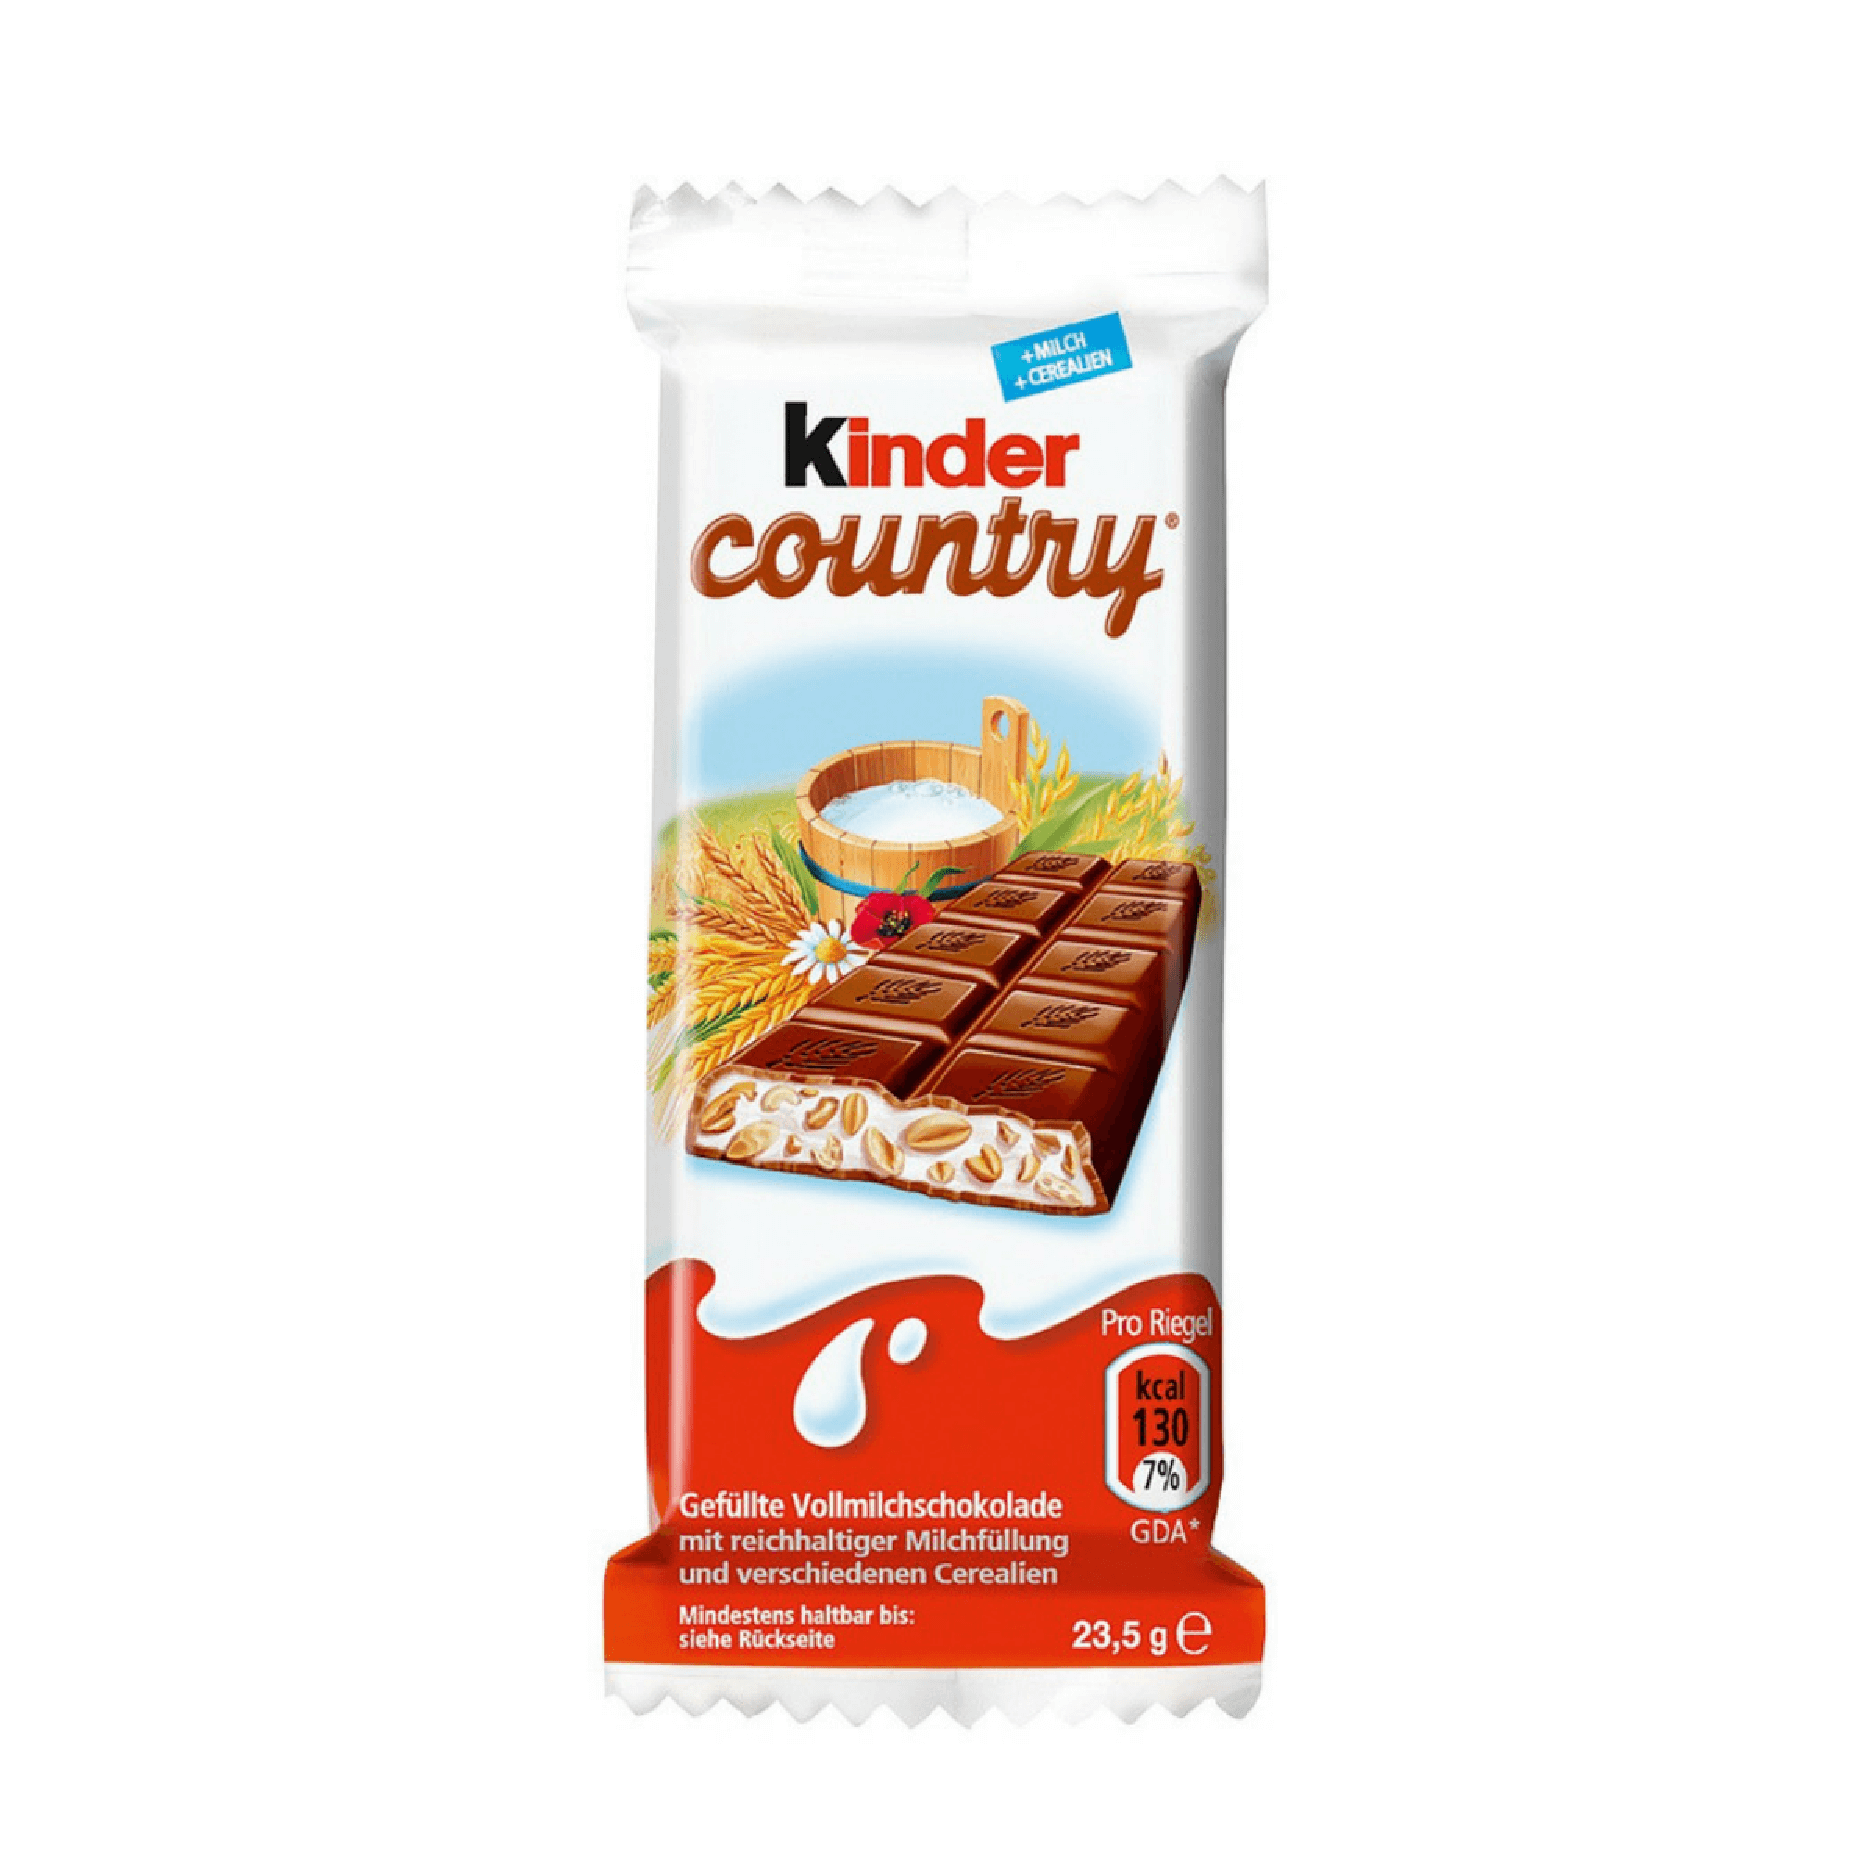 Kinder Country Milk Chocolate - German Candy